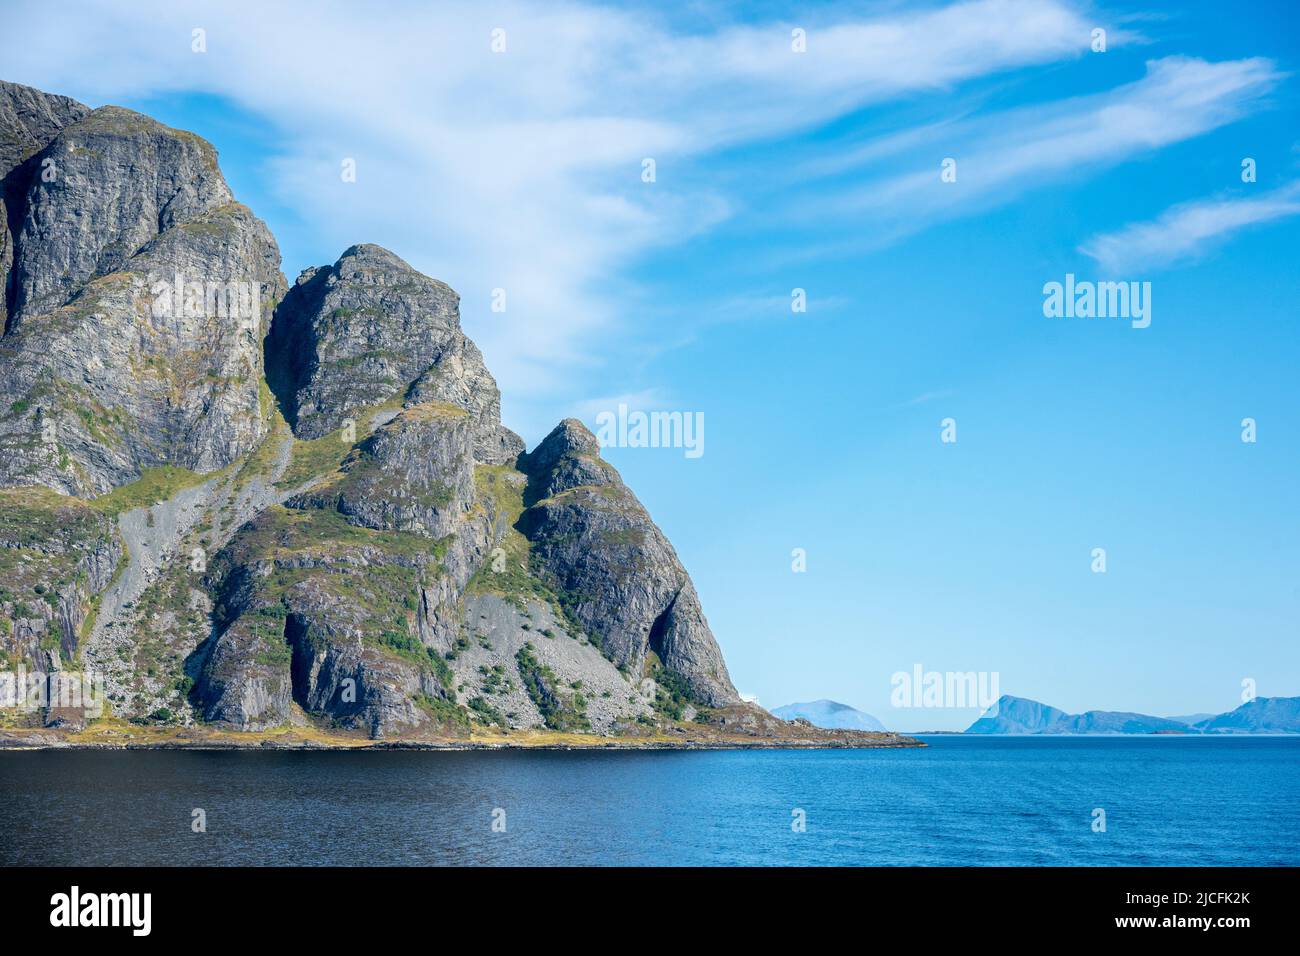 Norway, Vestland, view to the 481 meter high, prominent island Alden. Stock Photo